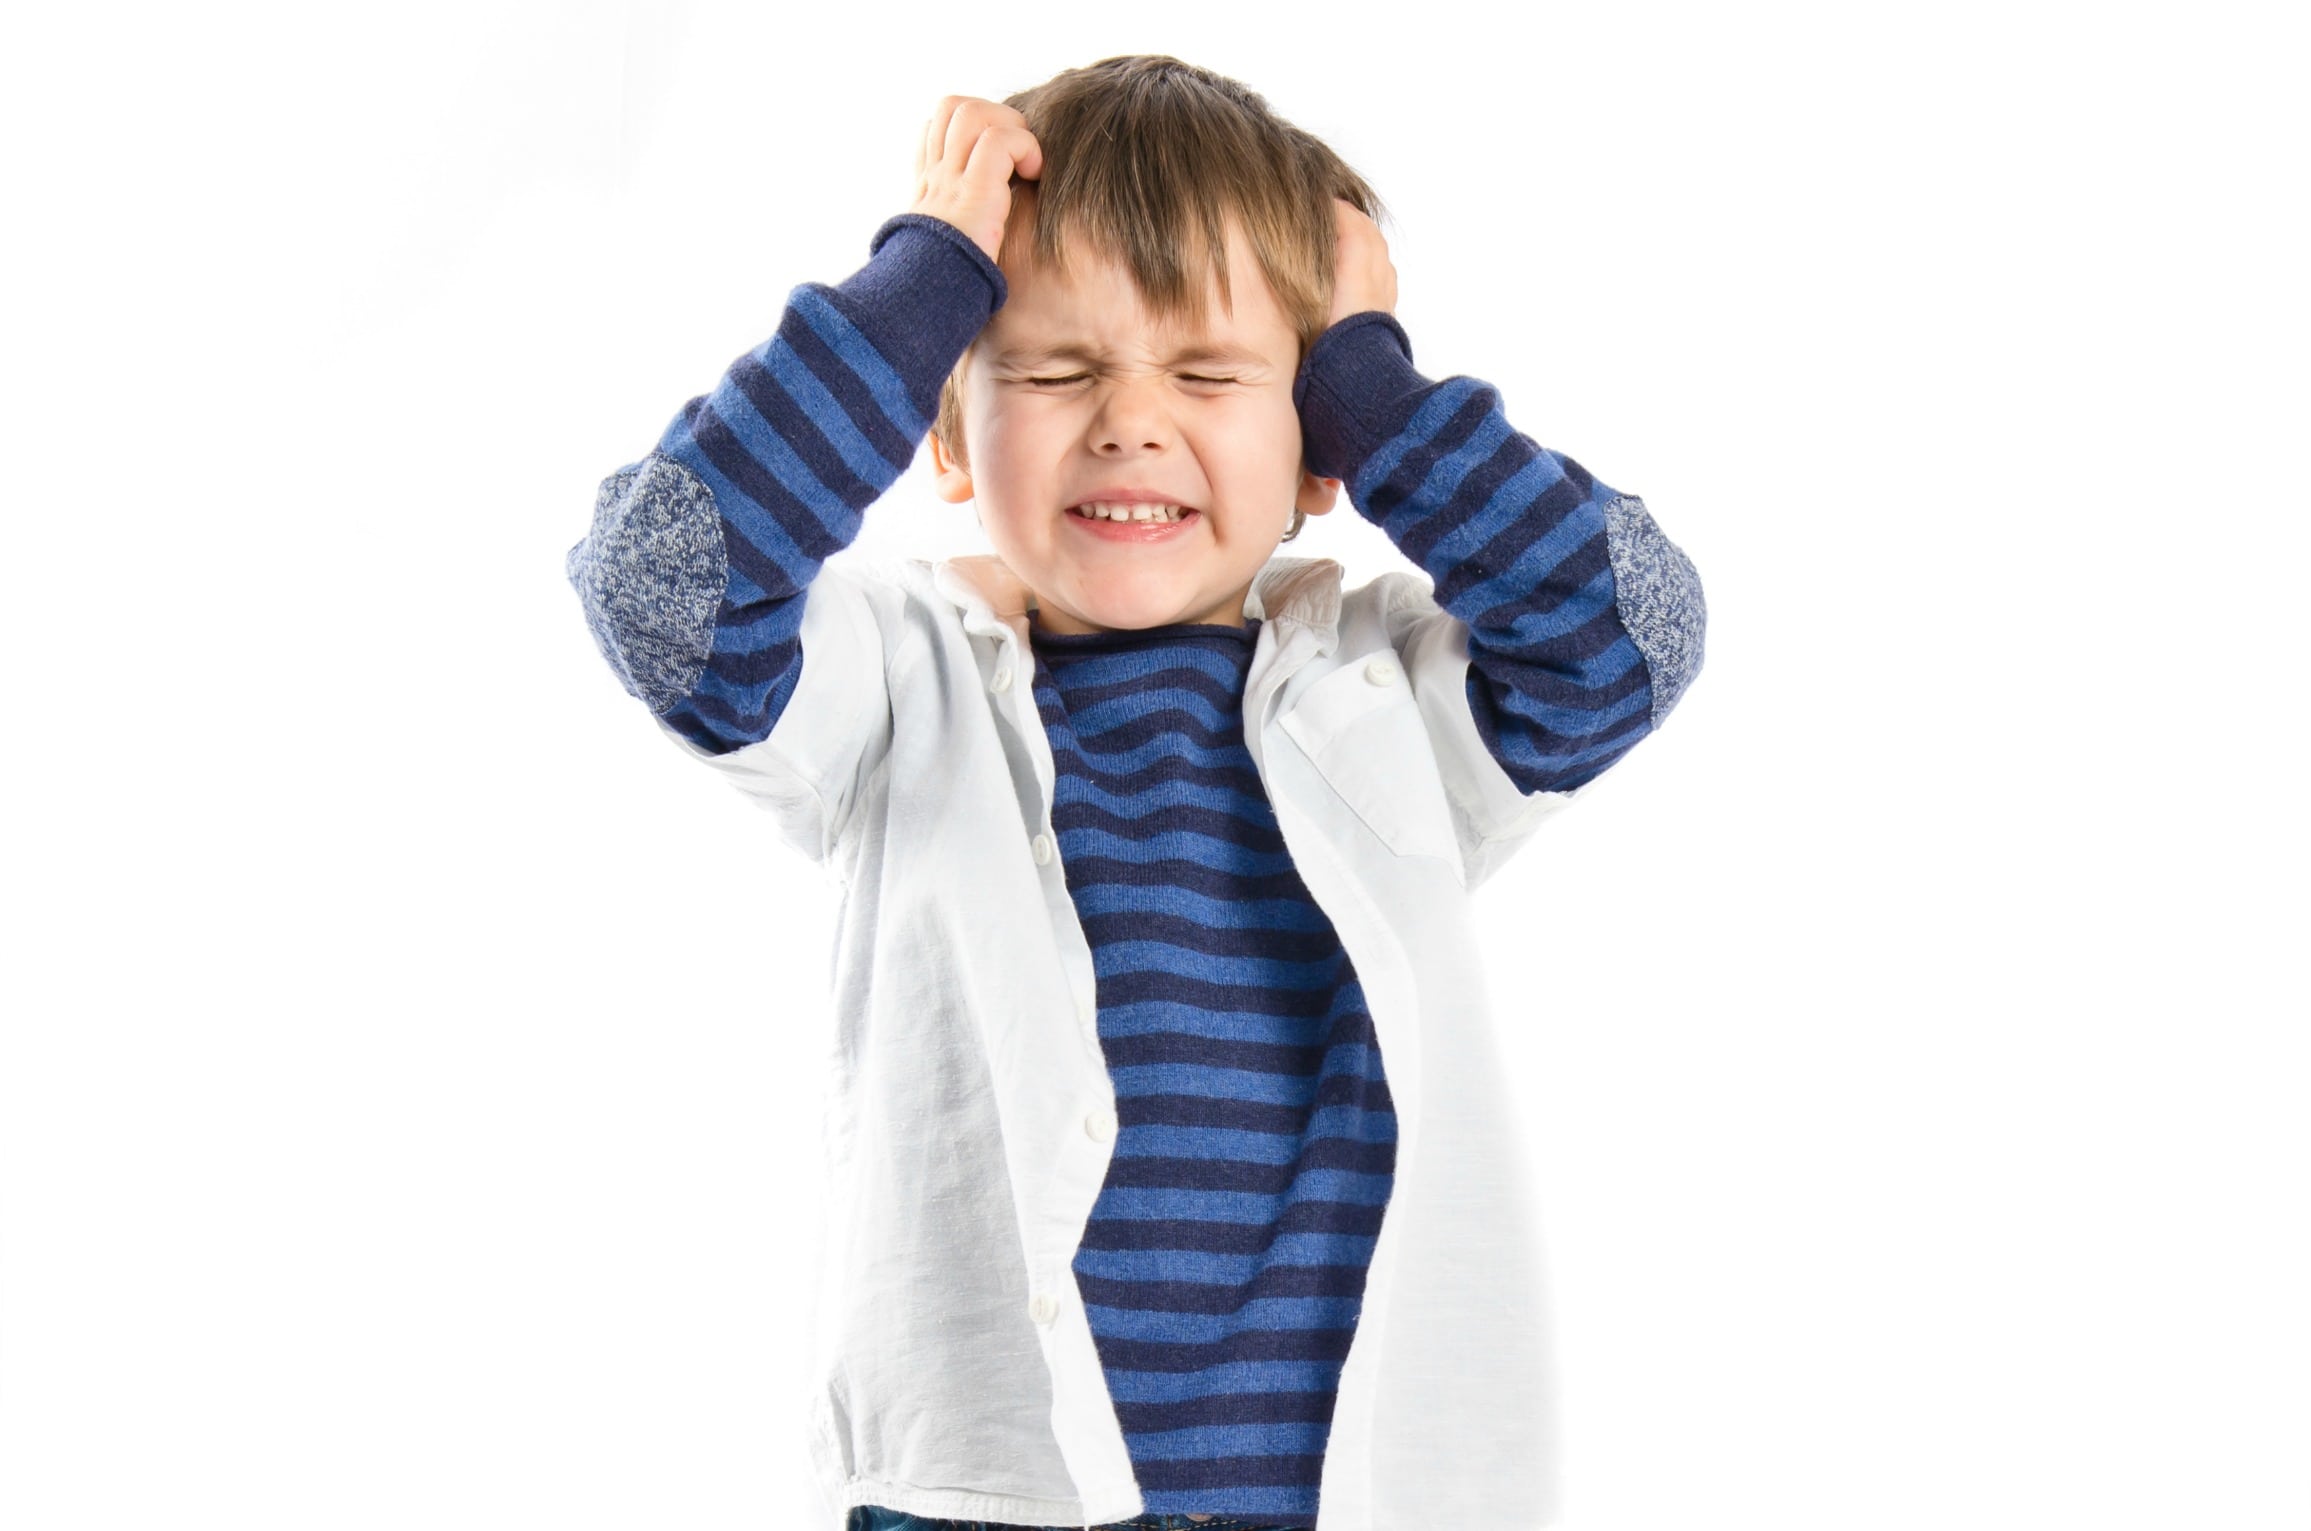 Signs That Your Child May Need Behavior Therapy